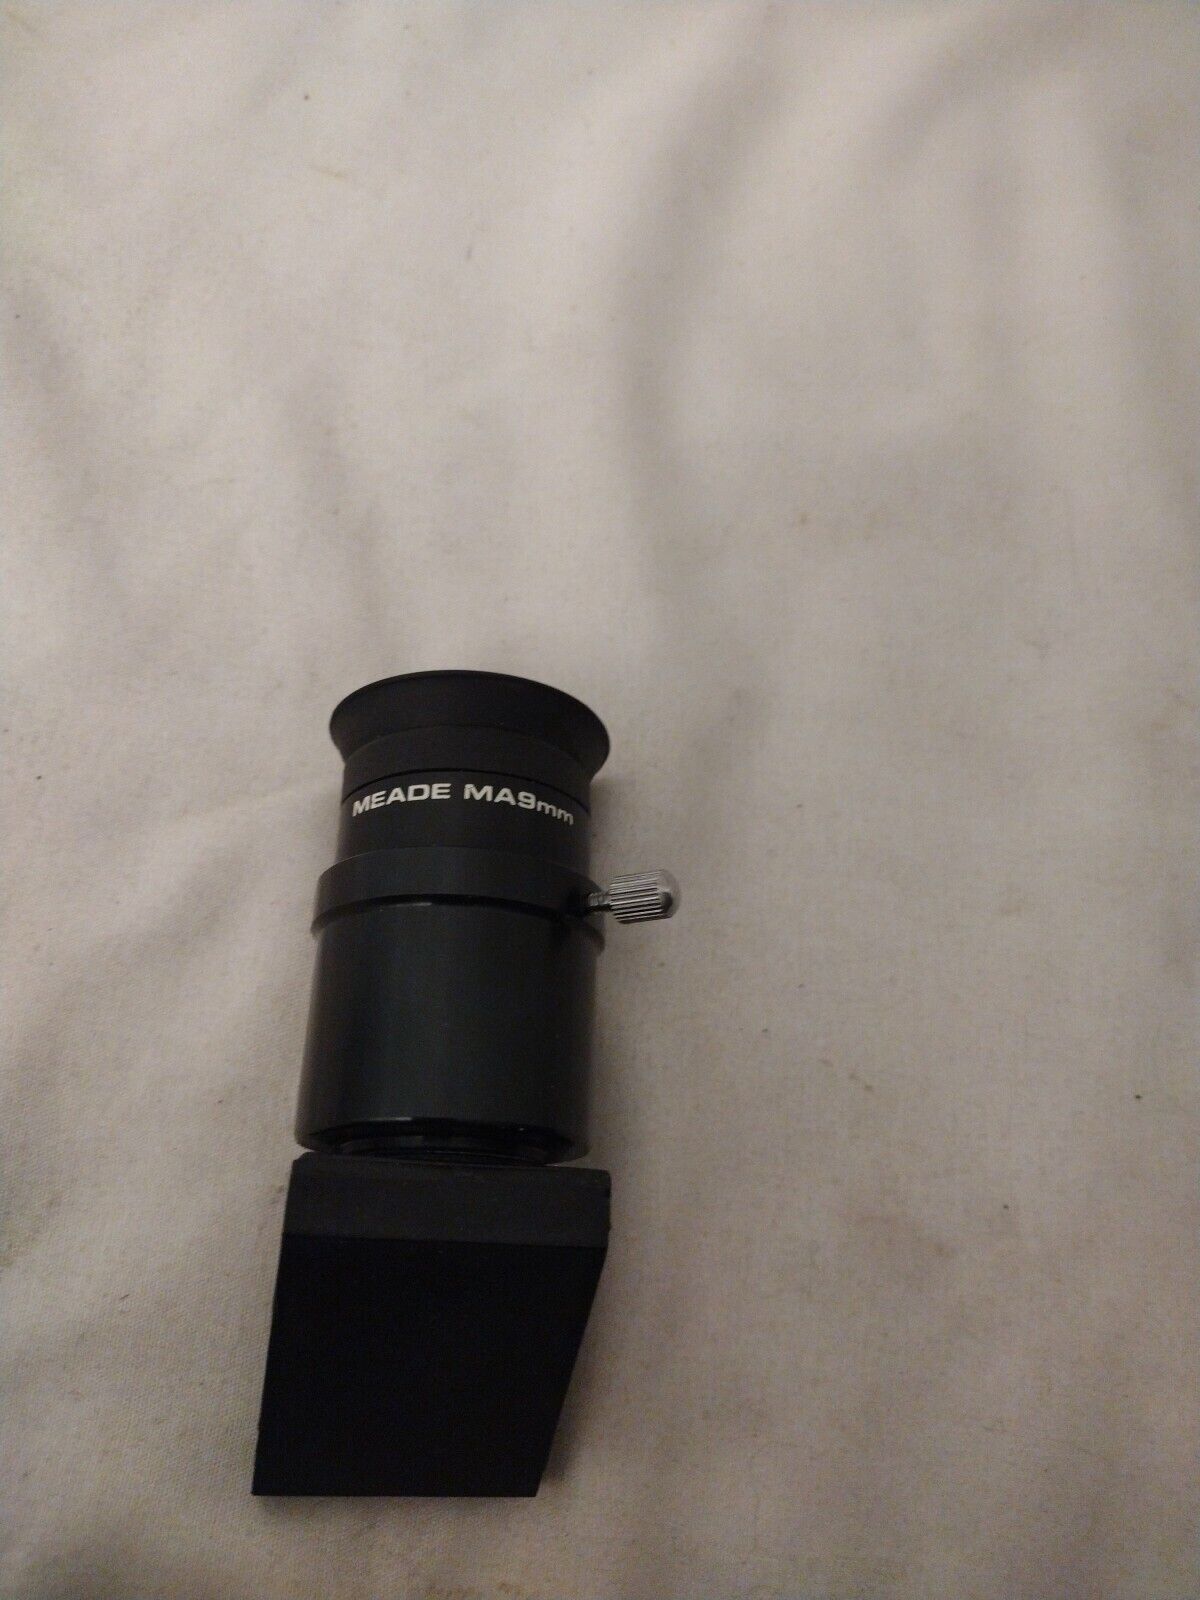 Meade Ma9mm Lense And Refractor For Telescope